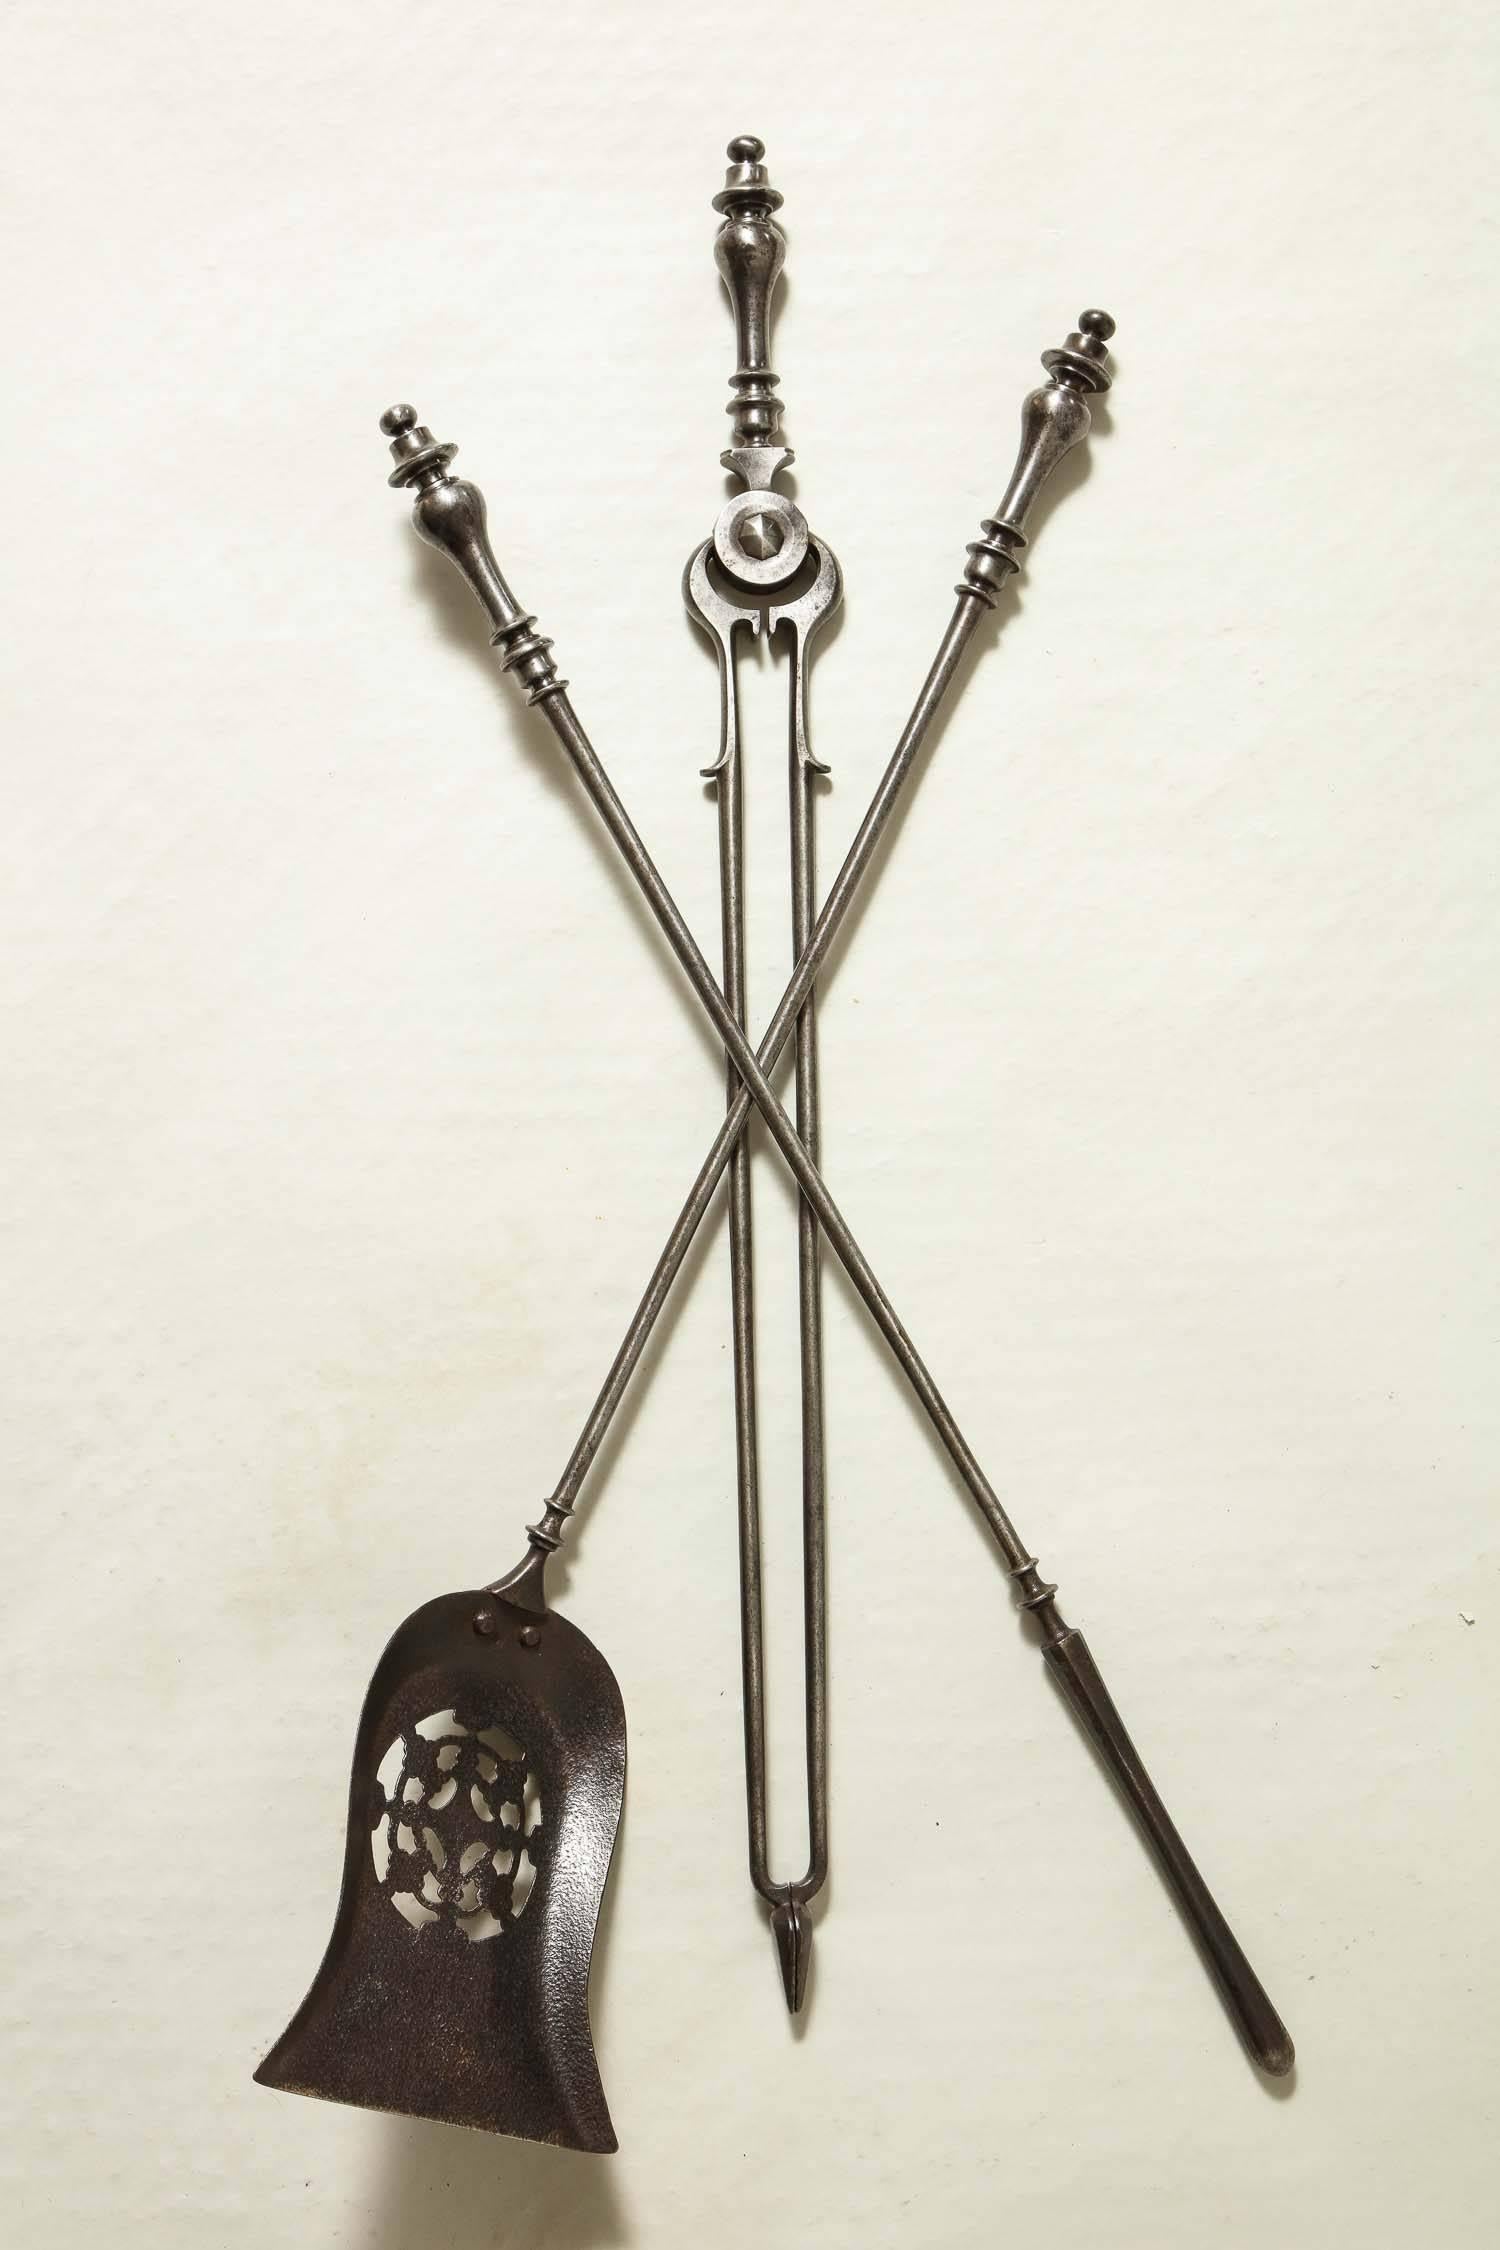 Fine set of 19th century gunmetal steel fire tools comprising a shovel, pair of tongs and poker, all with turned handles, the shovel with pierced geometric pattern, all with pleasing weight and burnished surface.